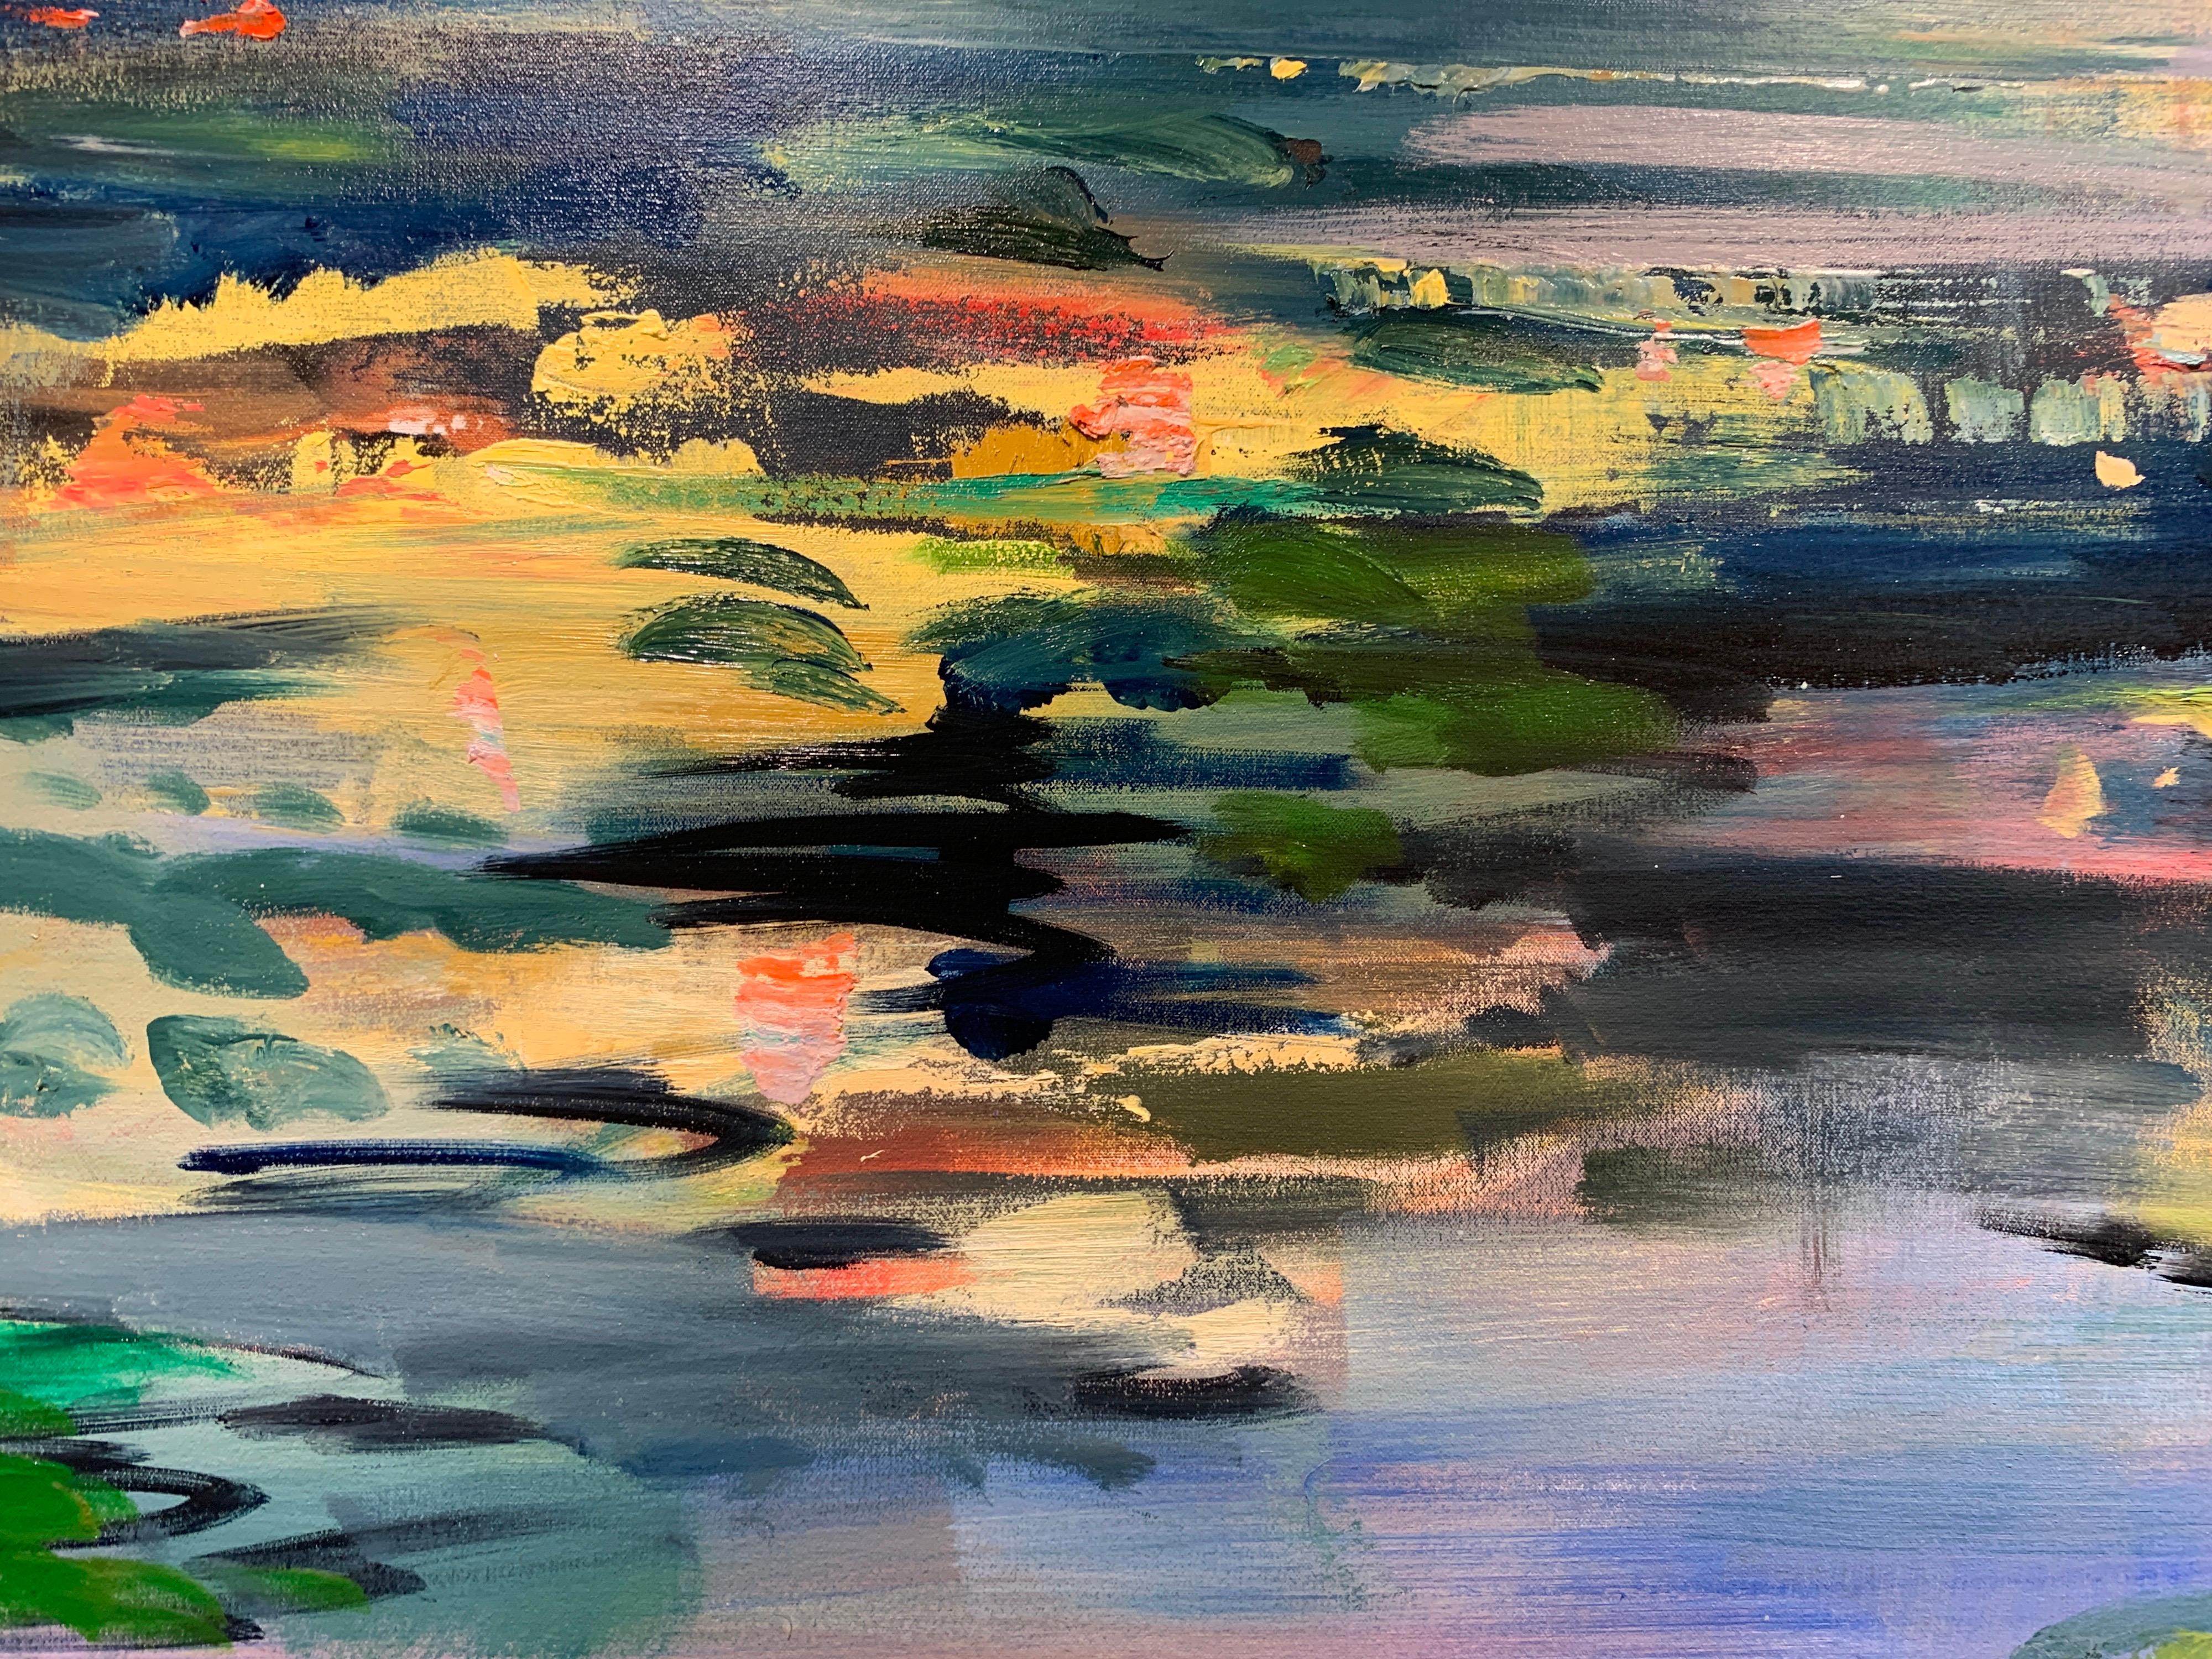 'Pond Reflections' is a large representational oil on canvas landscape painting created by American artist Craig Mooney in 2021. Featuring an exquisite palette mostly made of green, blue and cream tones, accented with touches of pink and purple, the